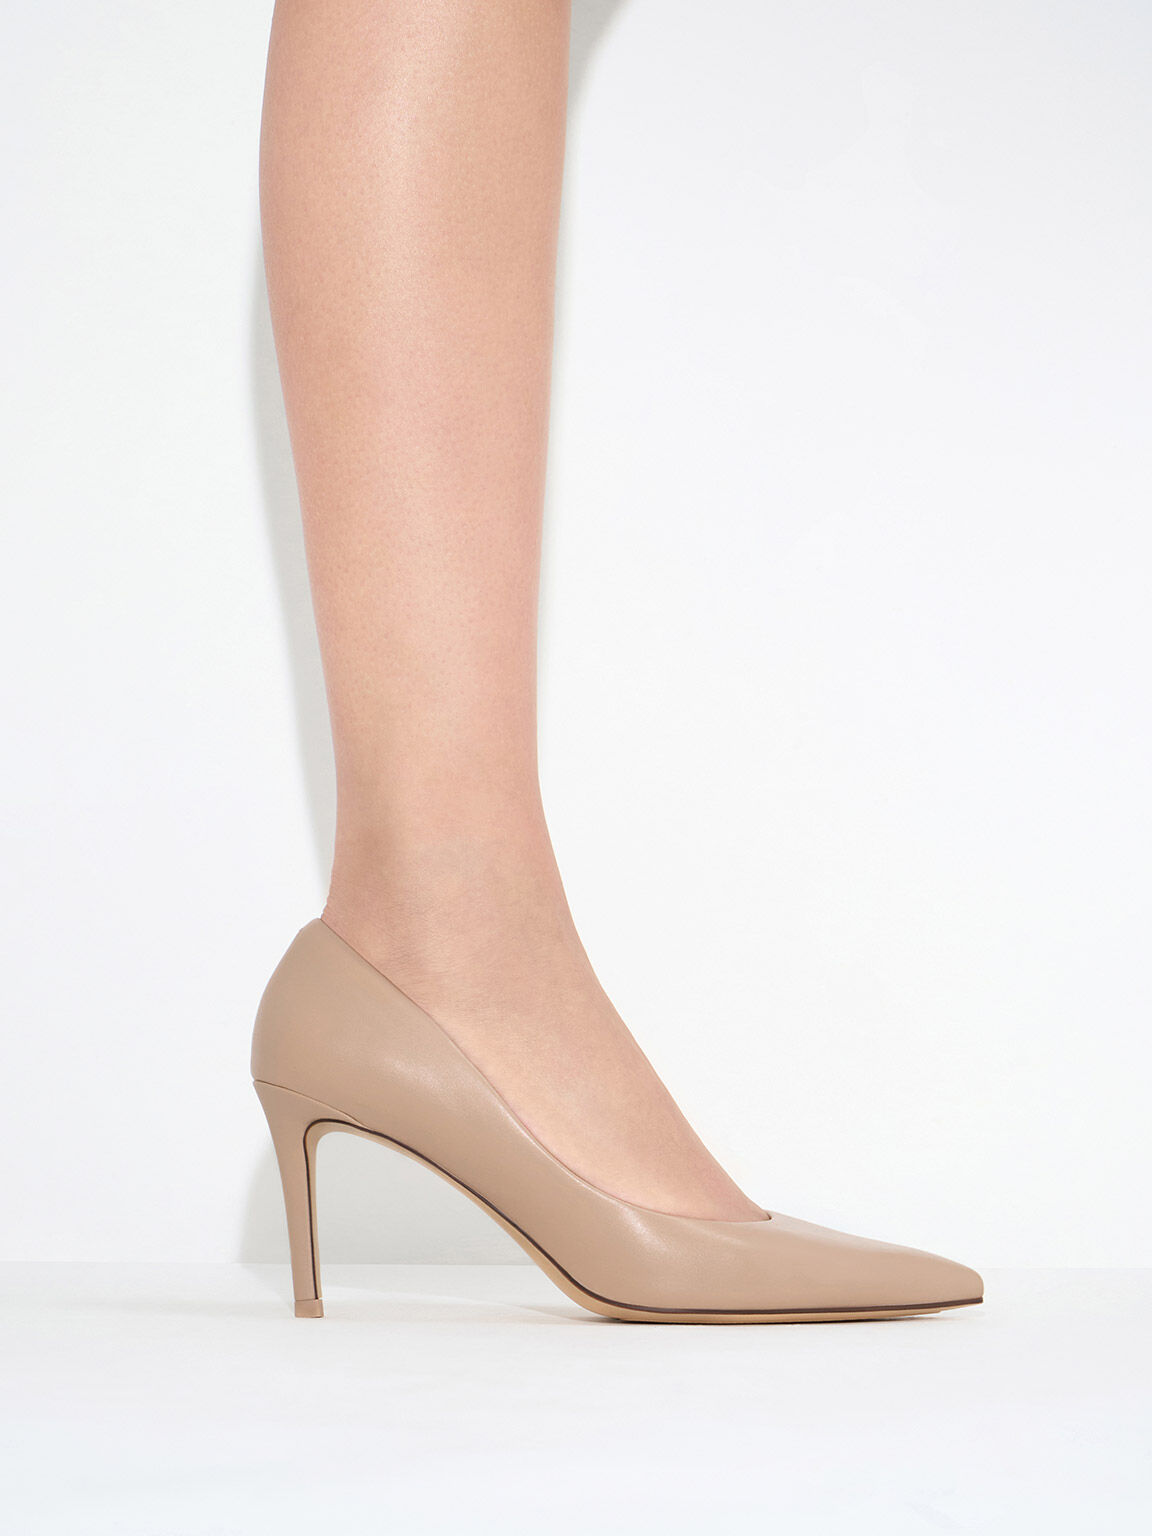 Emmy Pointed-Toe Stiletto Pumps, Nude, hi-res